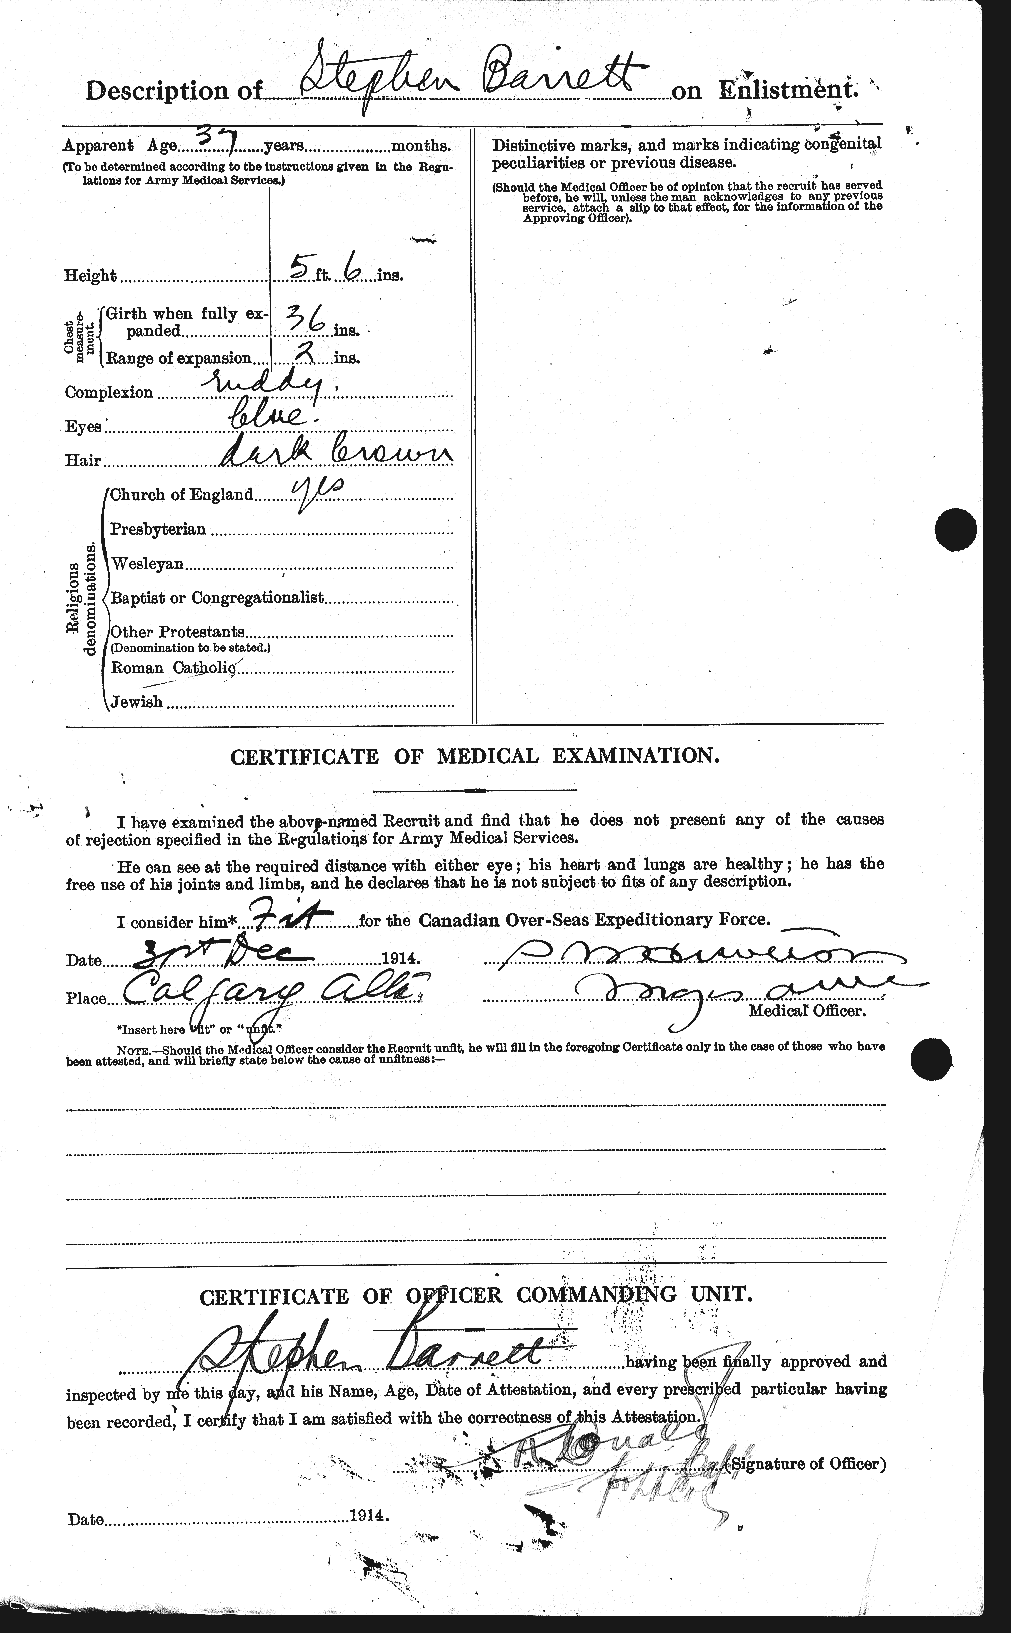 Personnel Records of the First World War - CEF 220175b